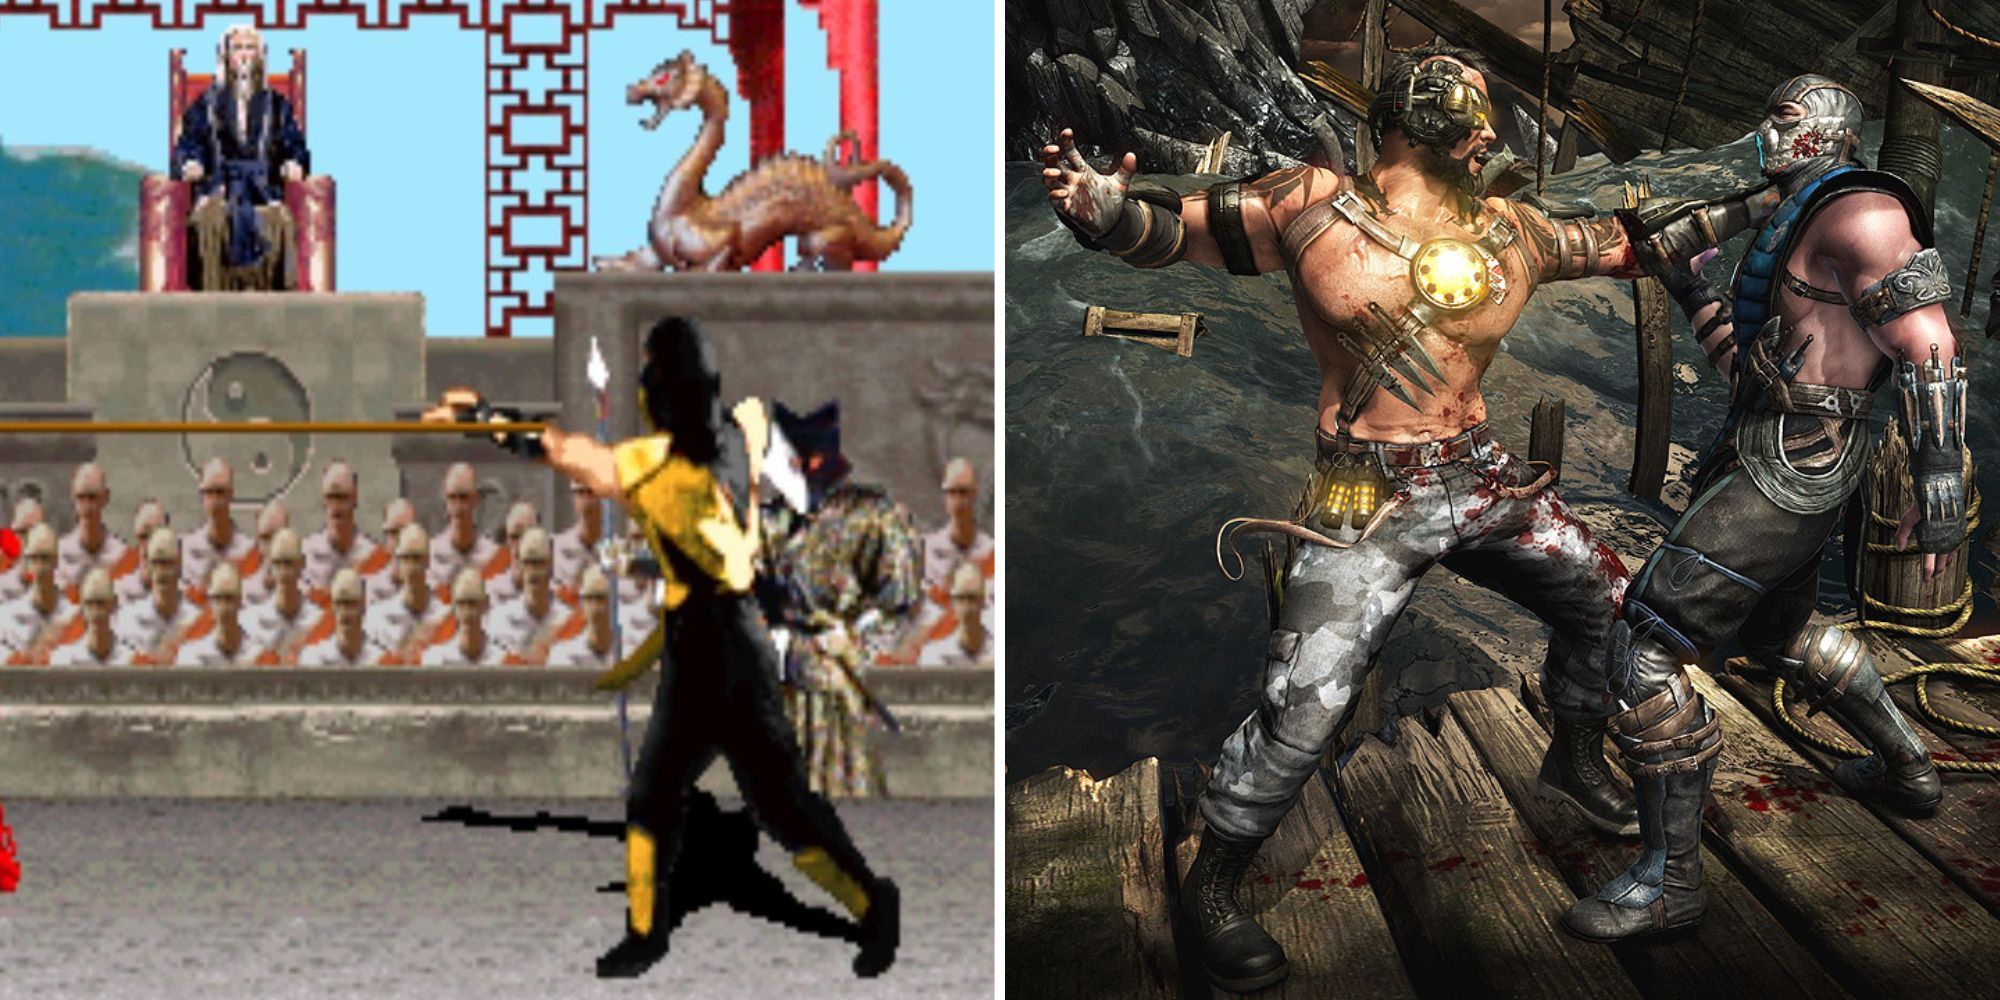 Scorpion from Mortal Kombat attacking in the original and two opponents brawling in Mortal Kombat X